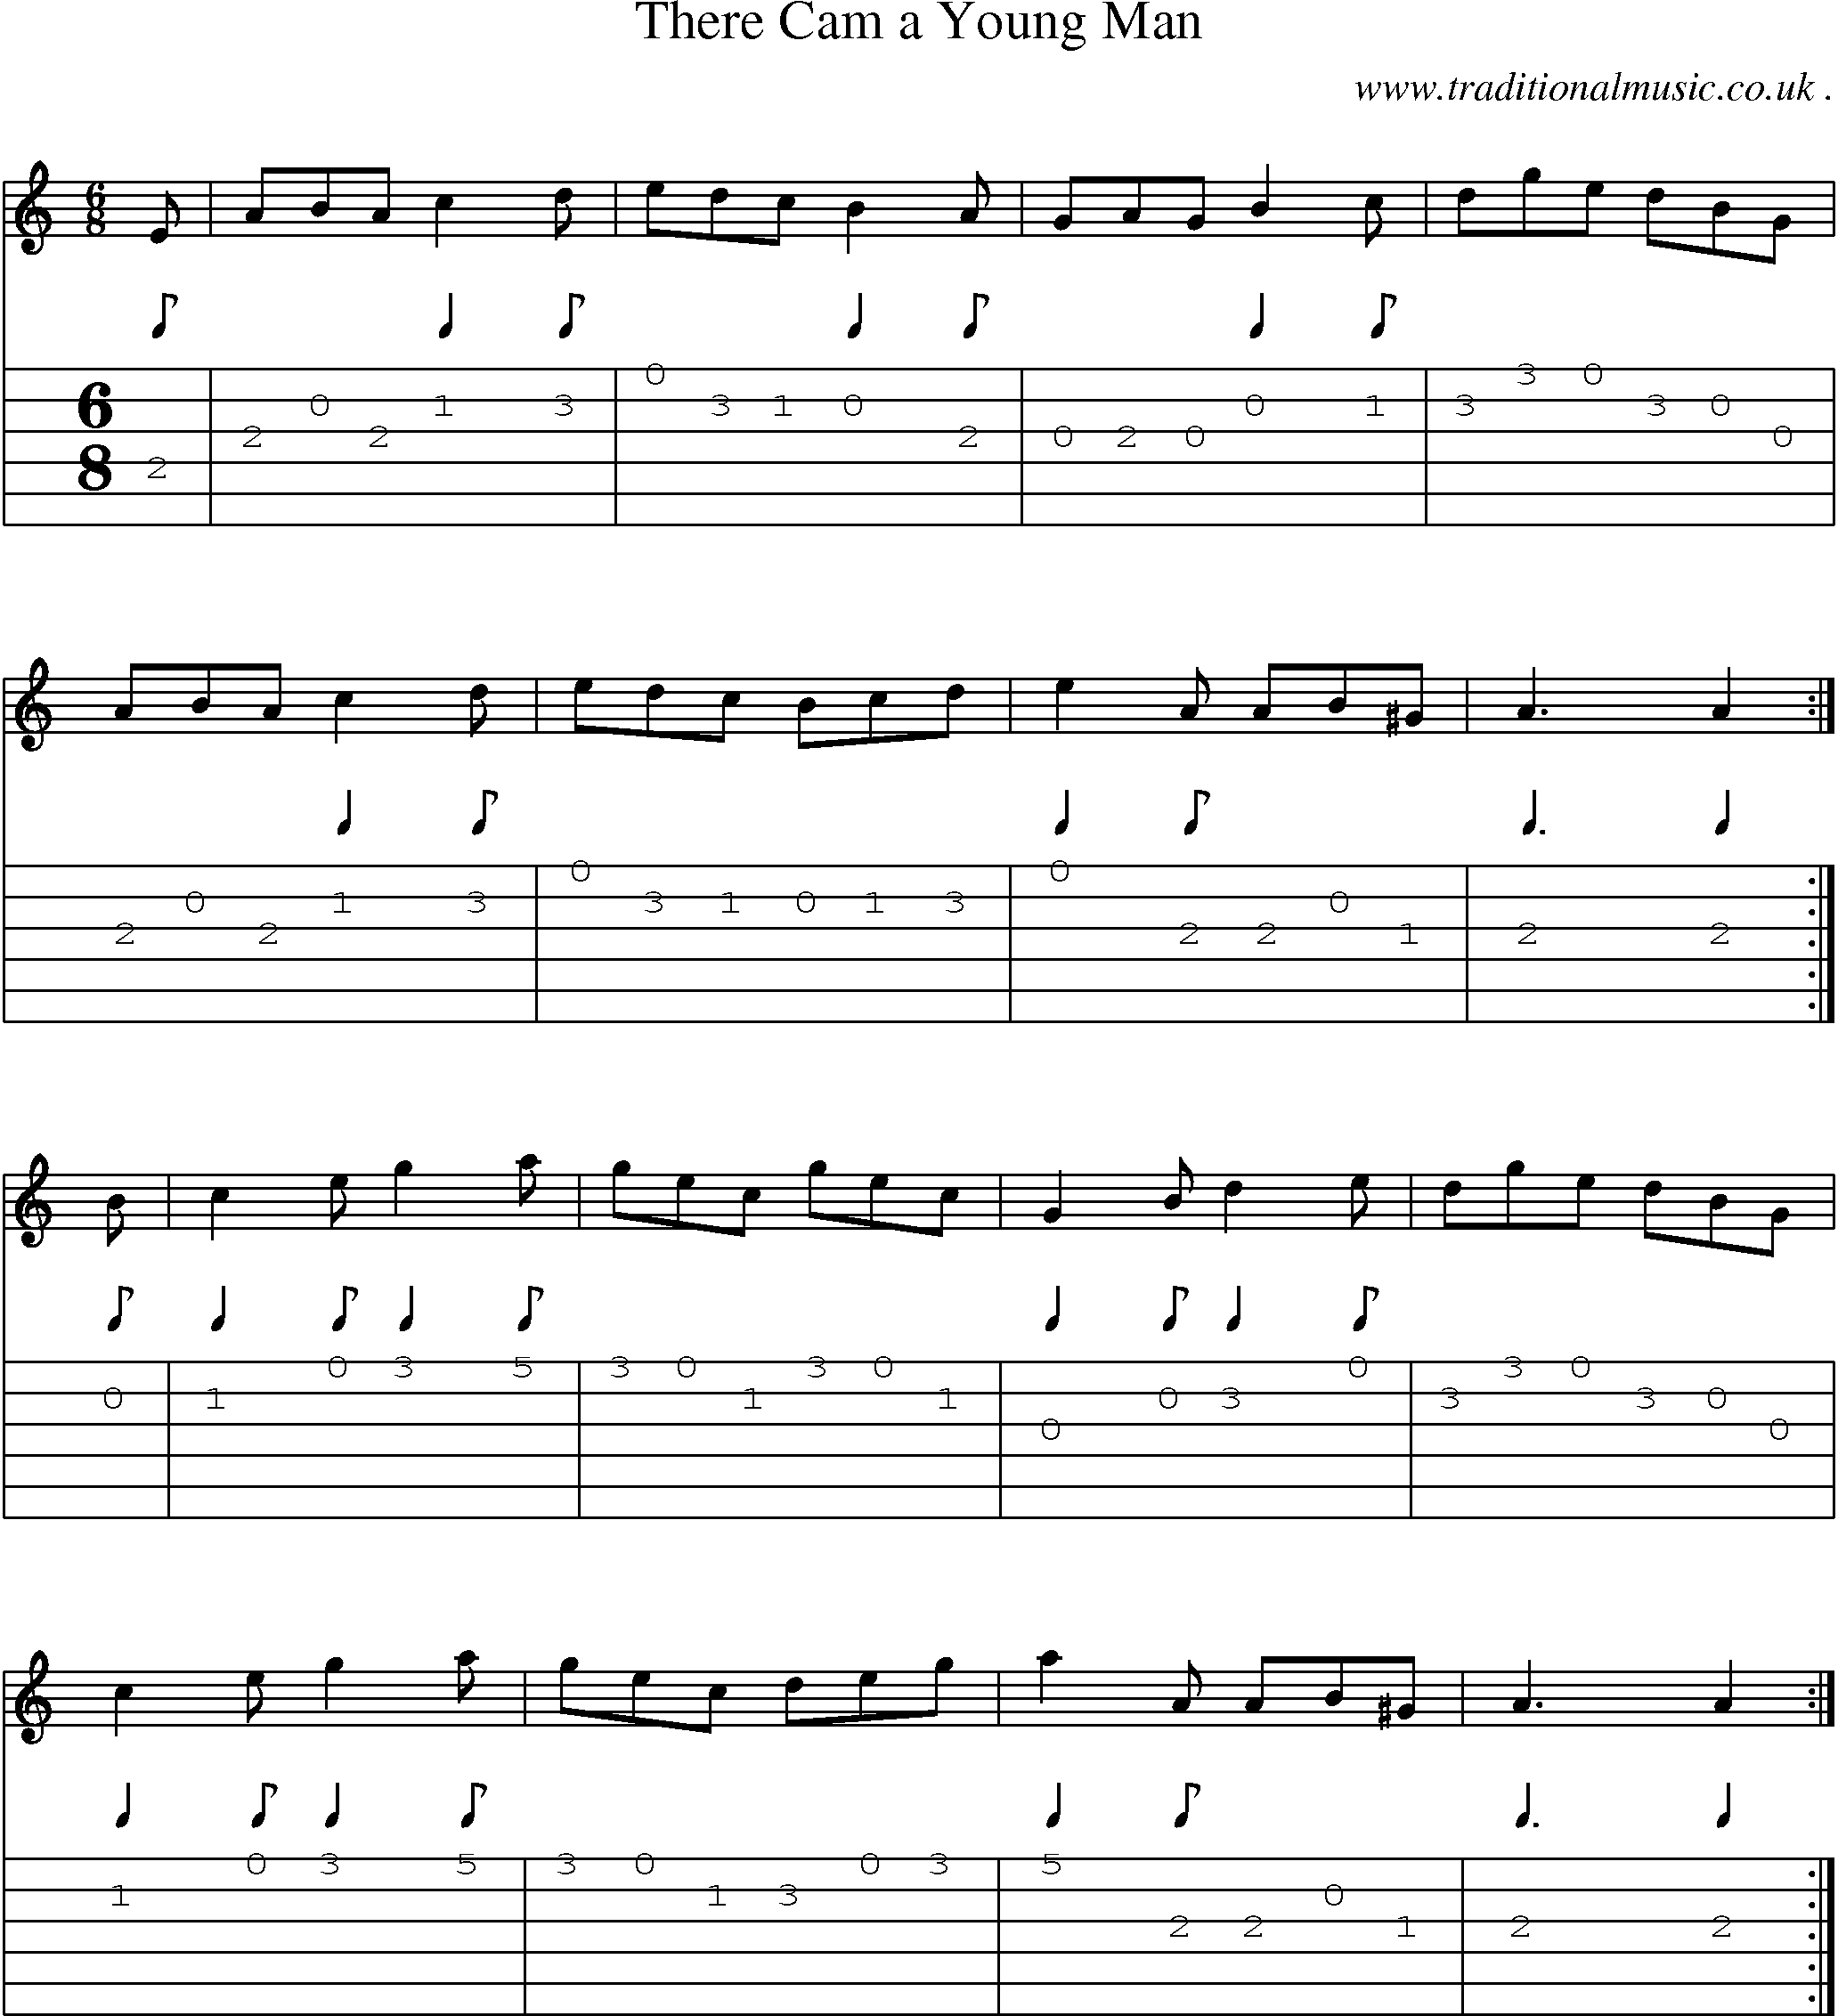 Sheet-music  score, Chords and Guitar Tabs for There Cam A Young Man